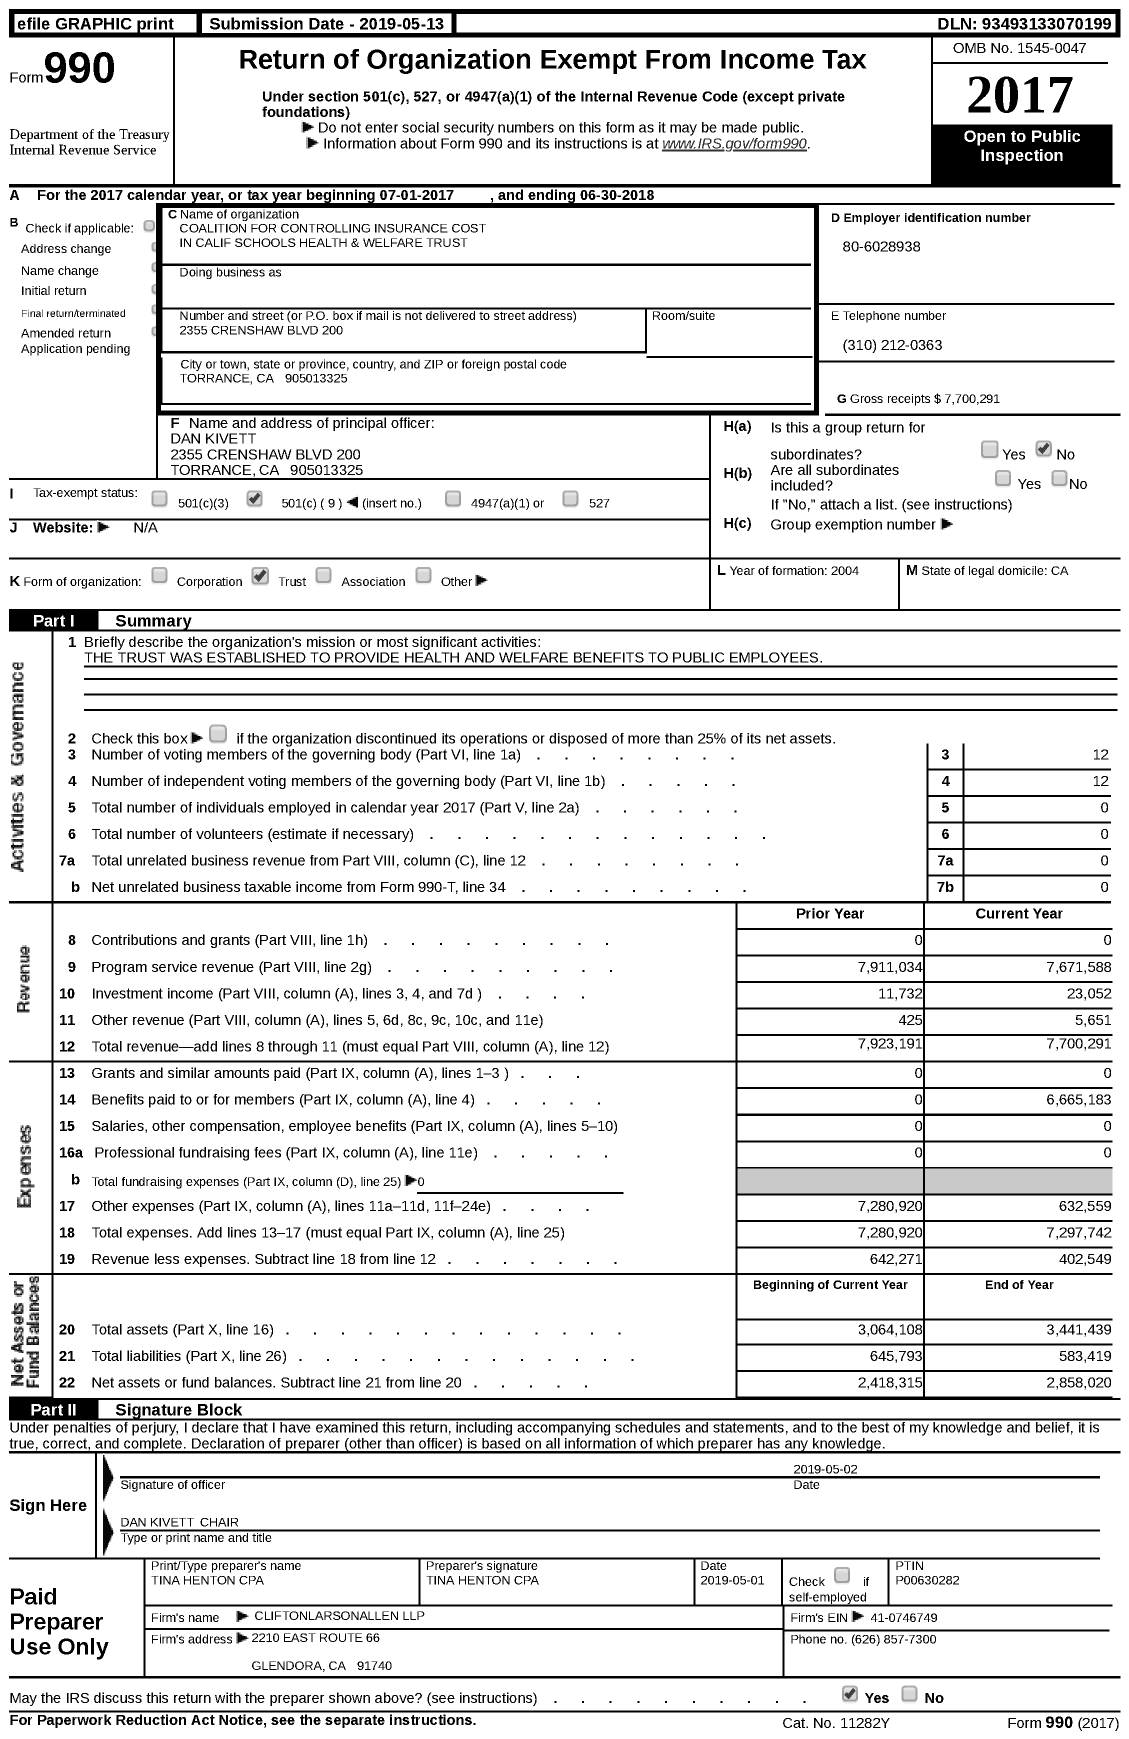 Image of first page of 2017 Form 990 for Coalition for Controlling Insurance in Calif Schools Health and Welfare